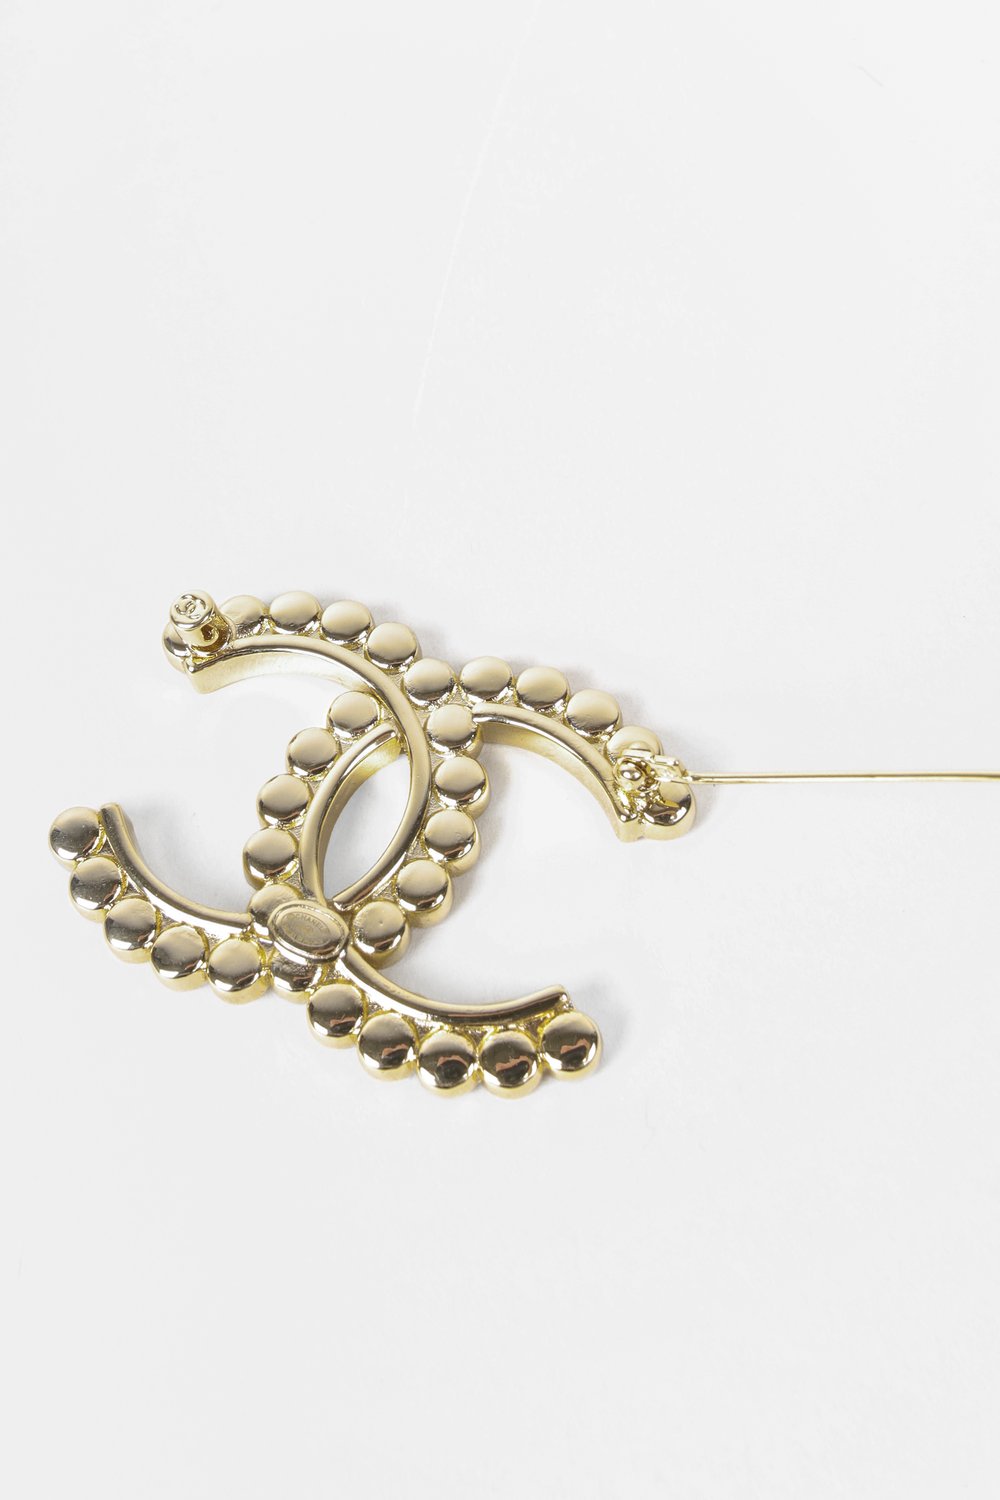 Chanel 20C Gold CC Crystal Brooch — BLOGGER ARMOIRE